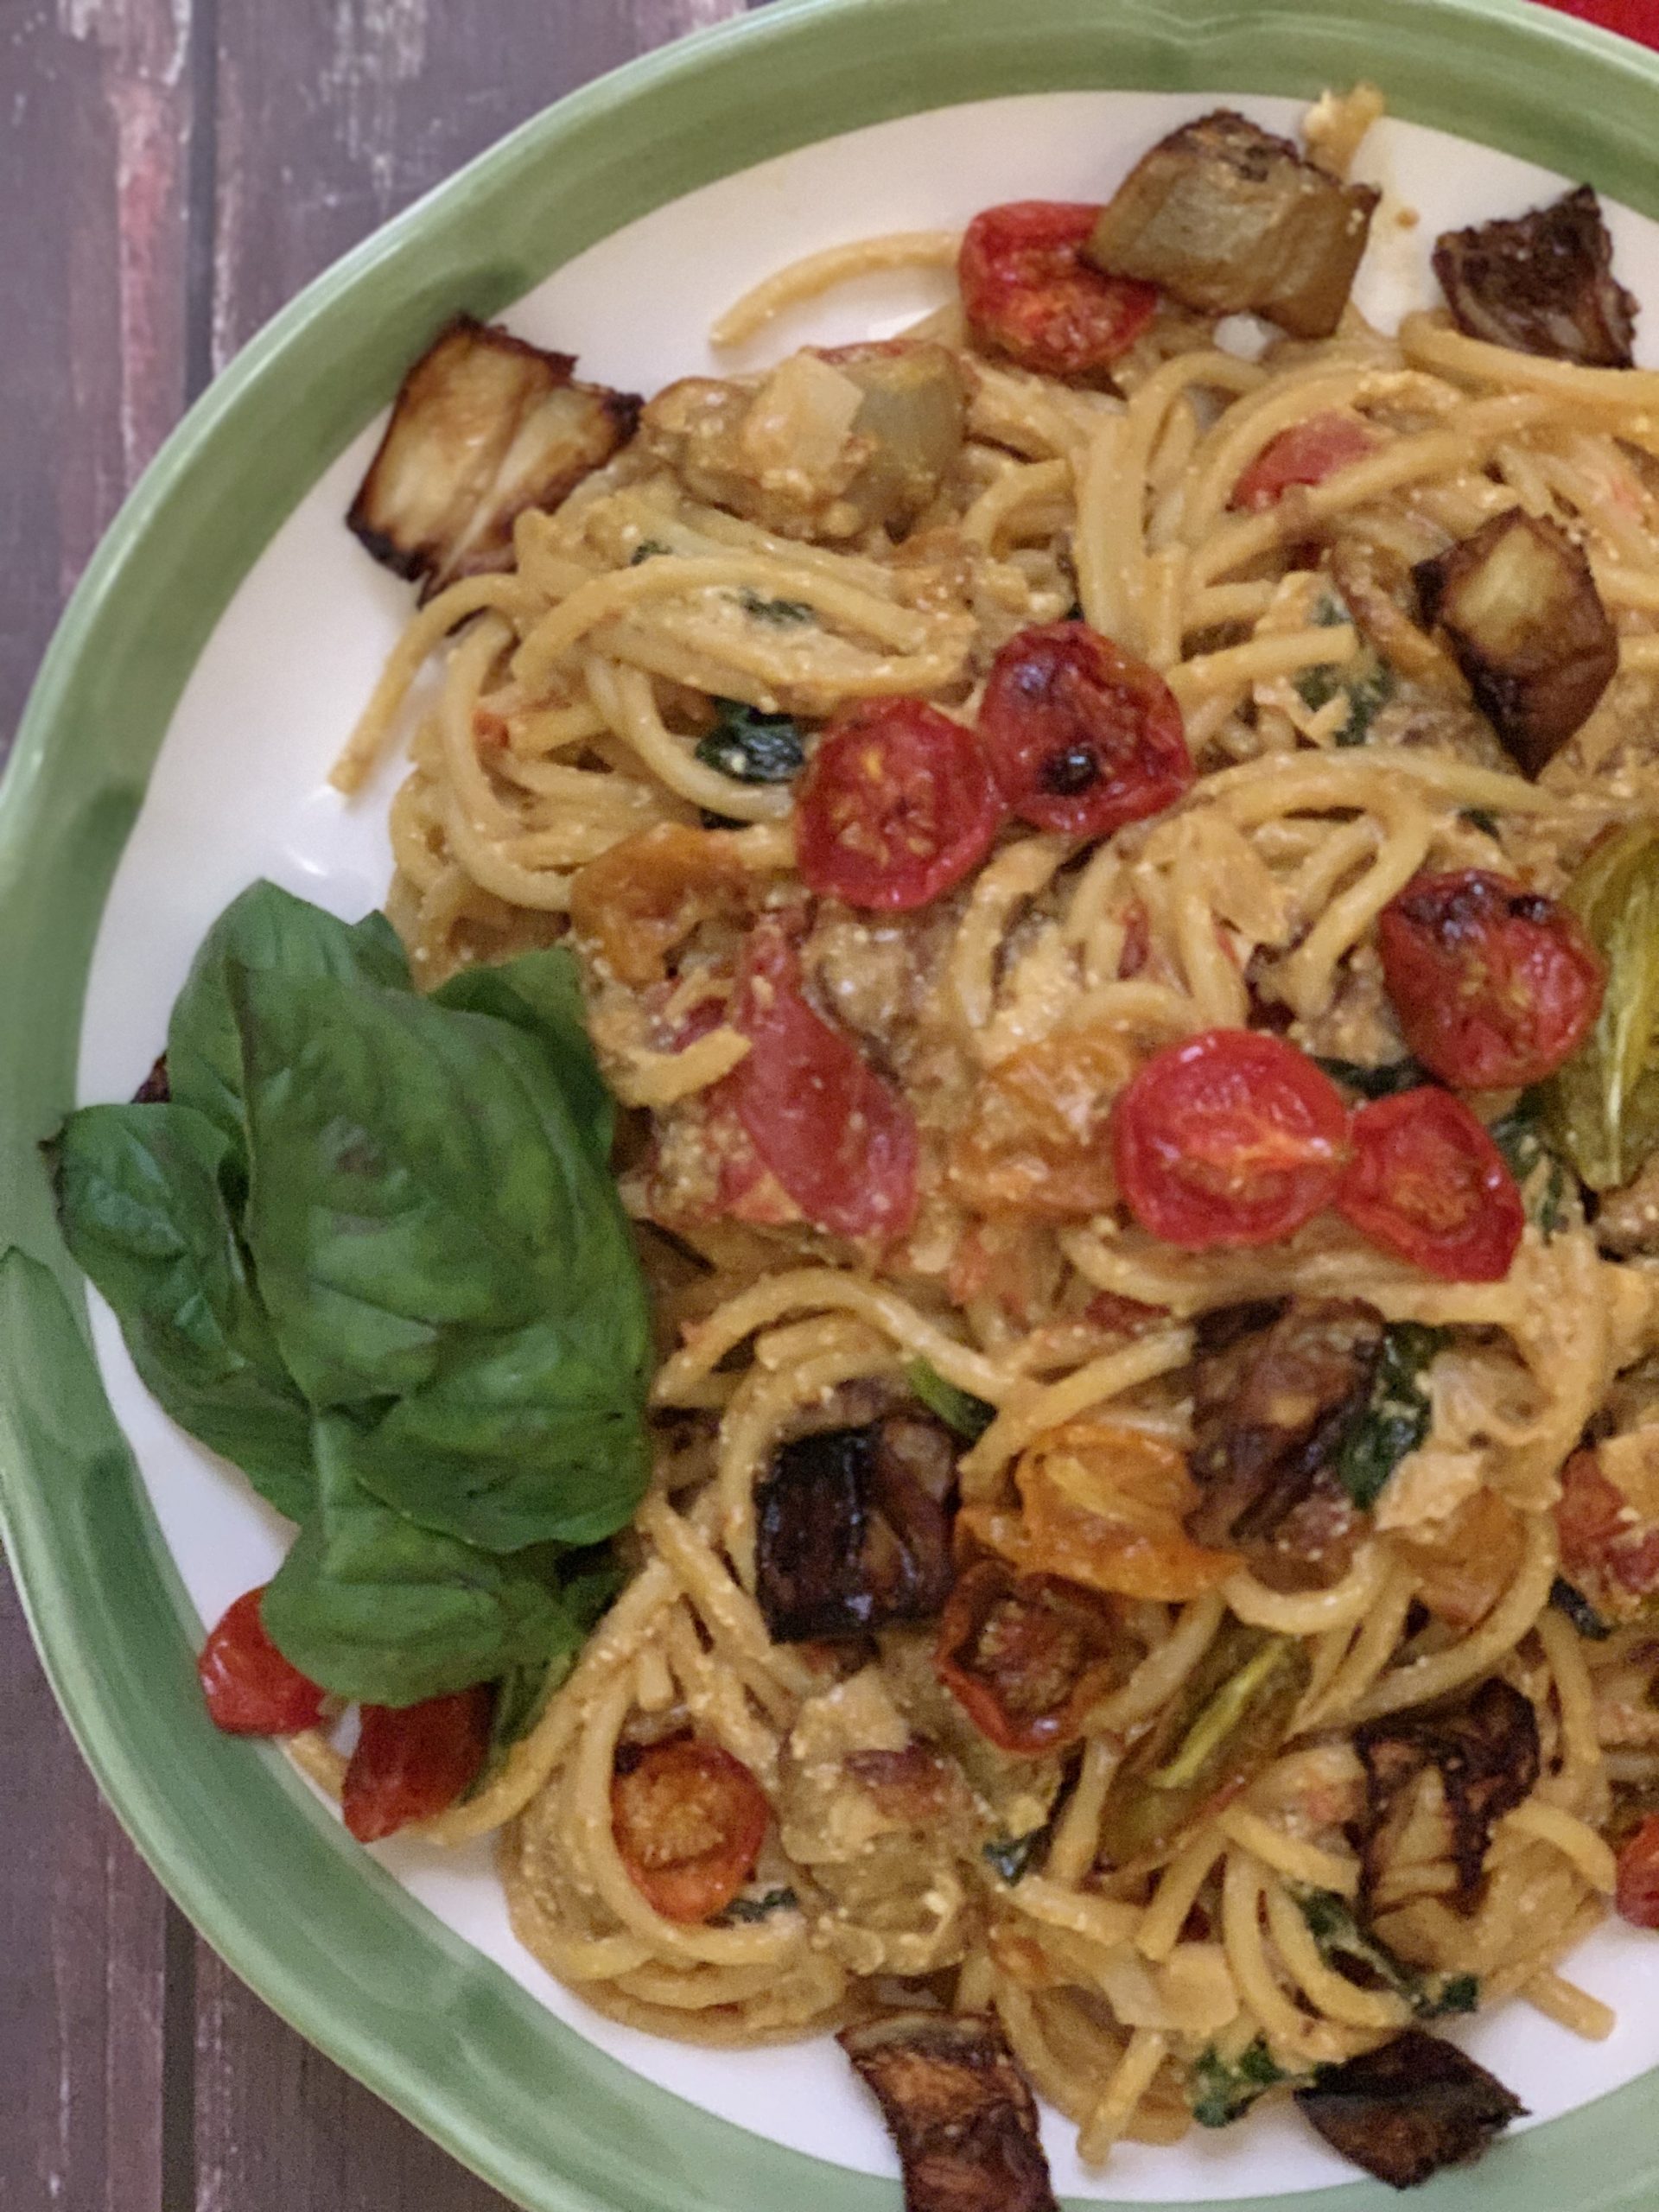 Bucatini with Ricotta, Slow-Roasted Eggplant and Tomatoes